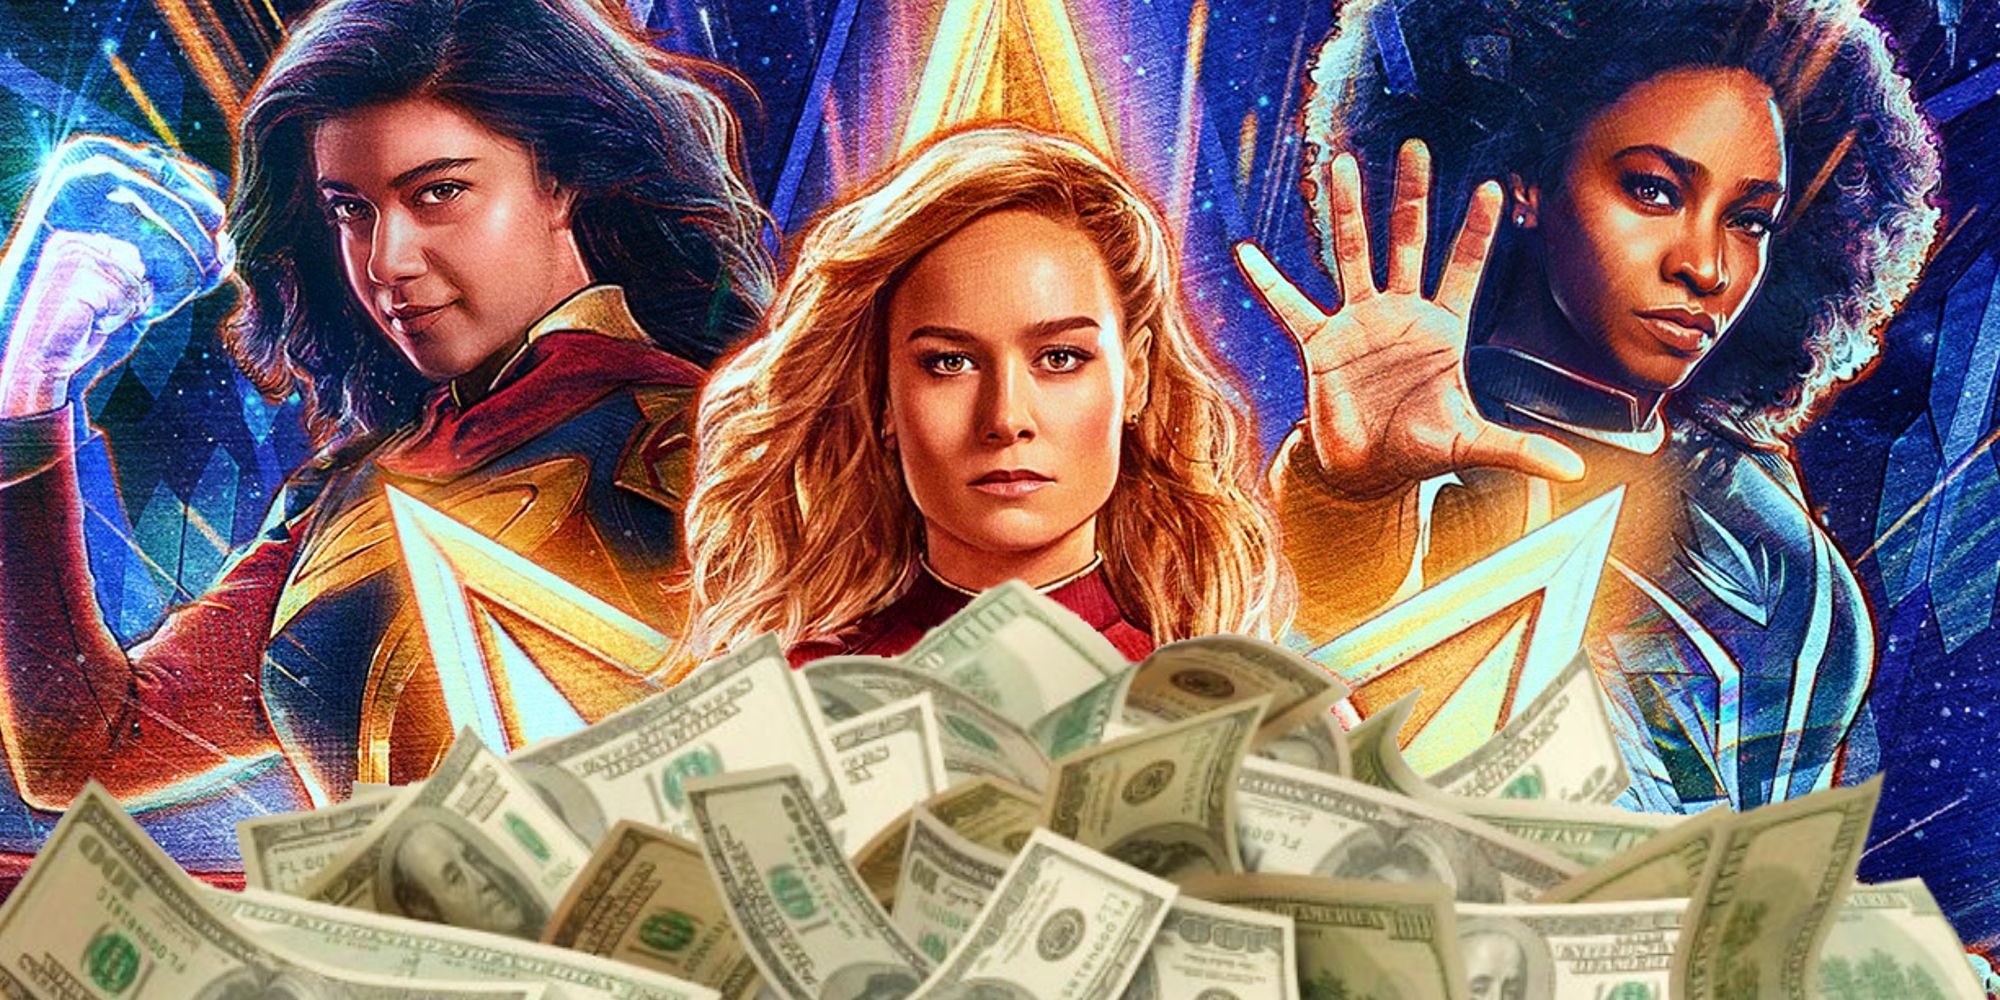 A recent report has unveiled that 'The Marvels' had a lower budget